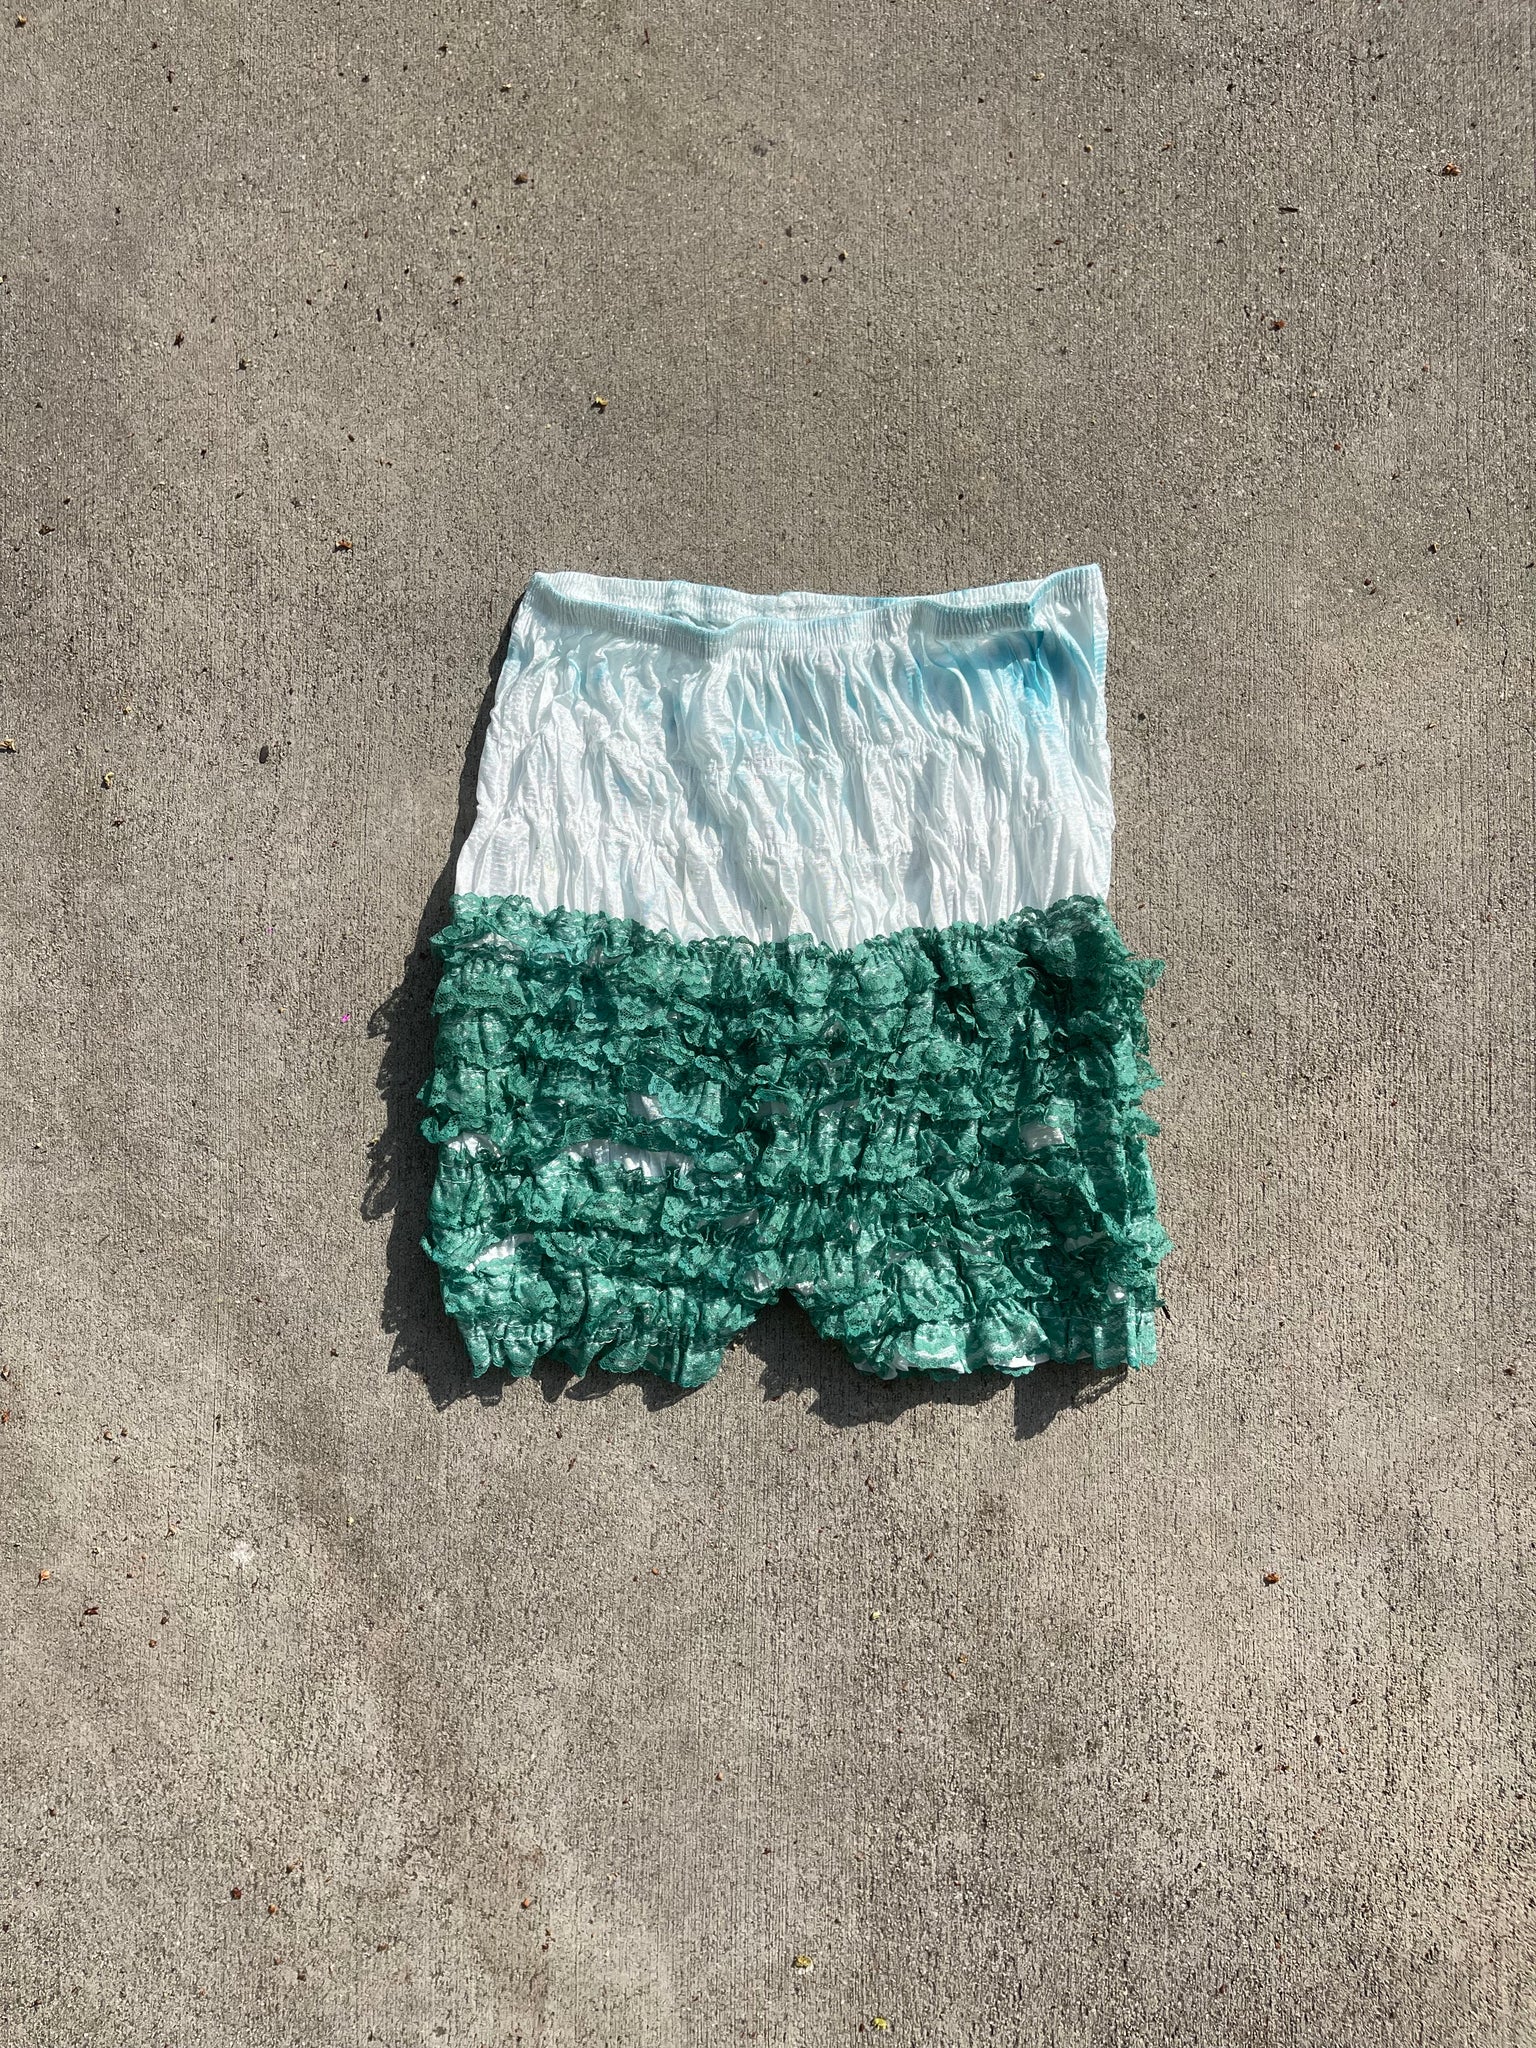 teal lace bloomers